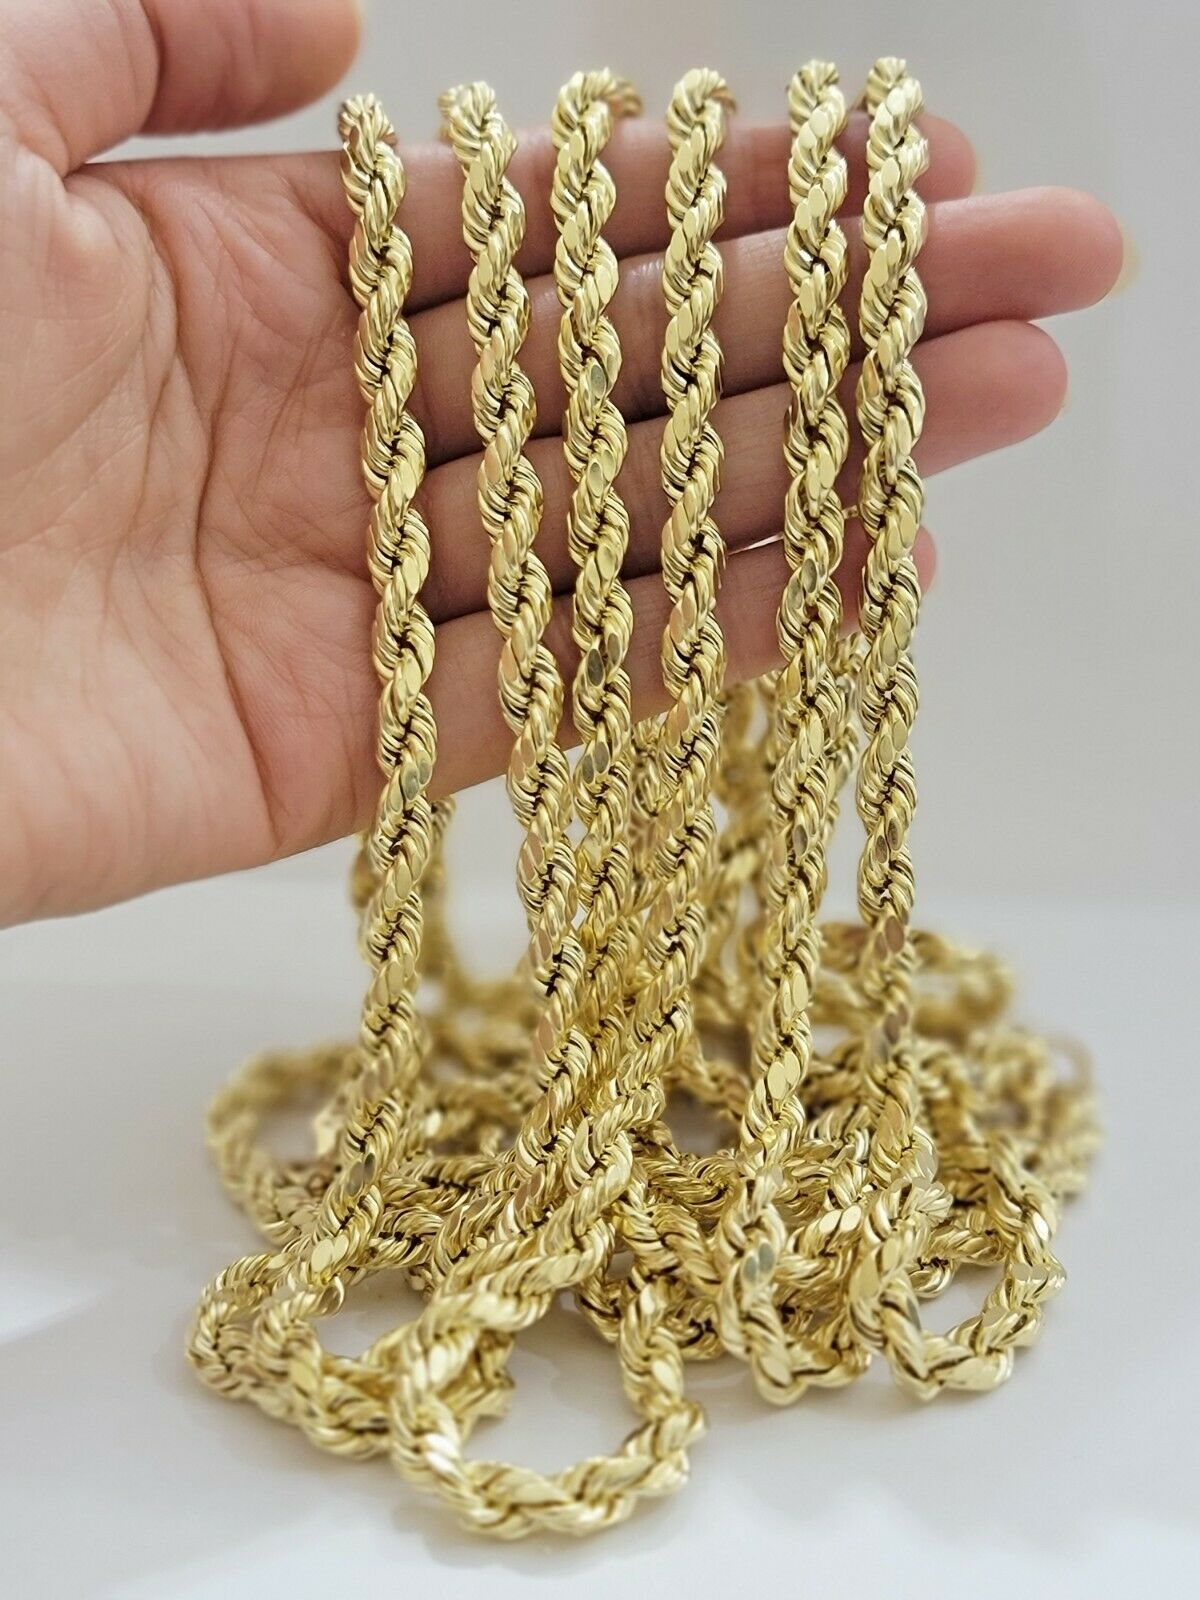 Buy 14k Yellow Gold Solid Diamond Cut Rope Chain 18-30 Inch 5mm